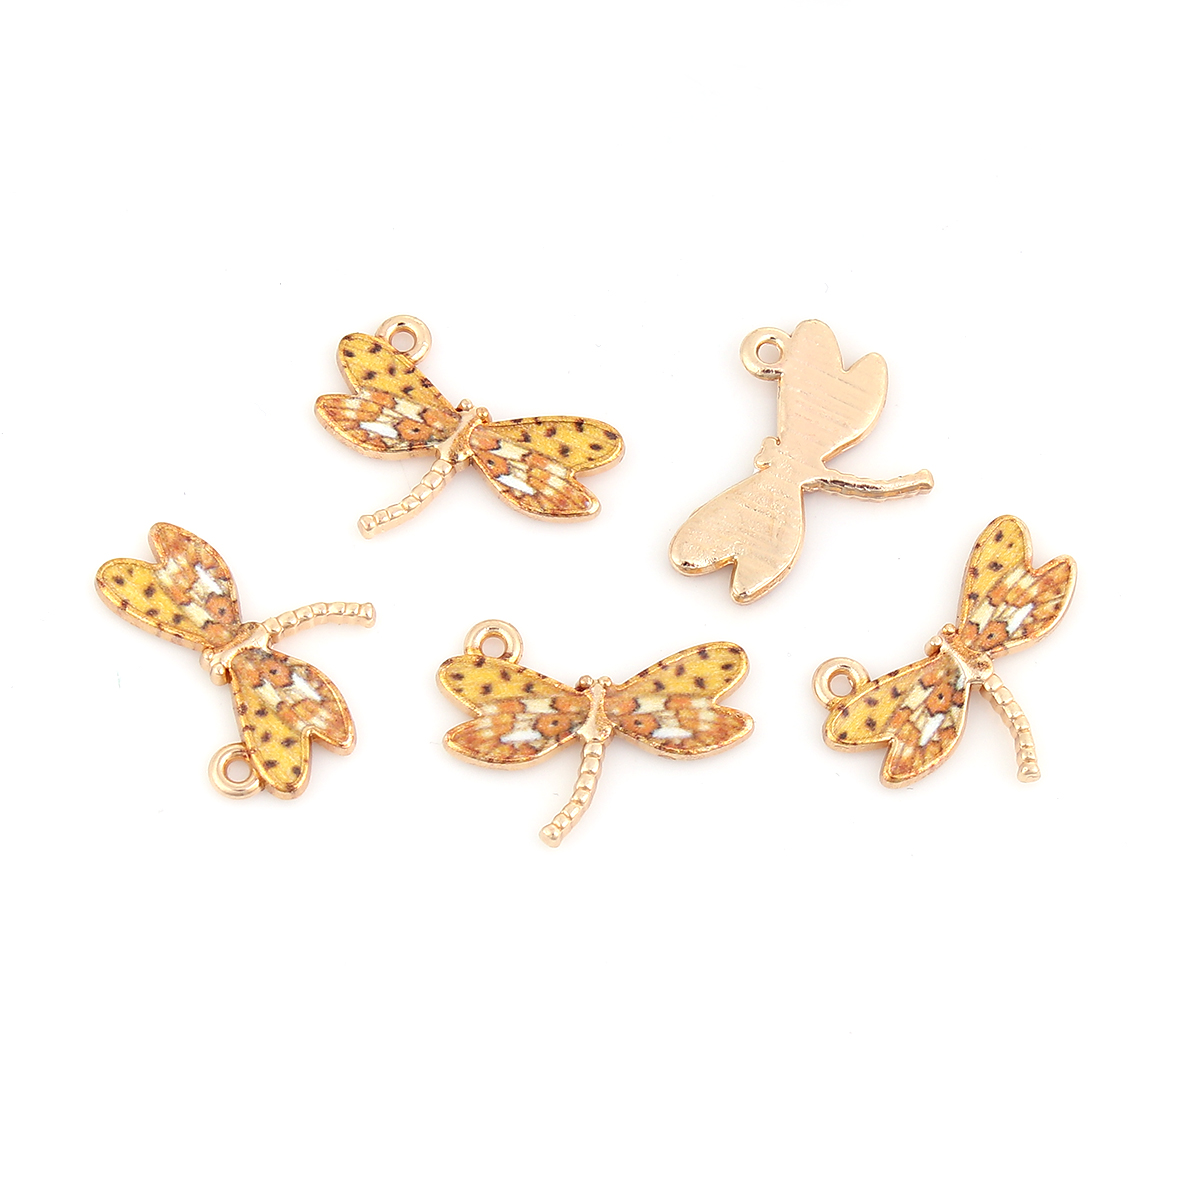 Picture of Zinc Based Alloy Charms Dragonfly Animal Gold Plated Yellow Enamel 22mm( 7/8") x 17mm( 5/8"), 10 PCs